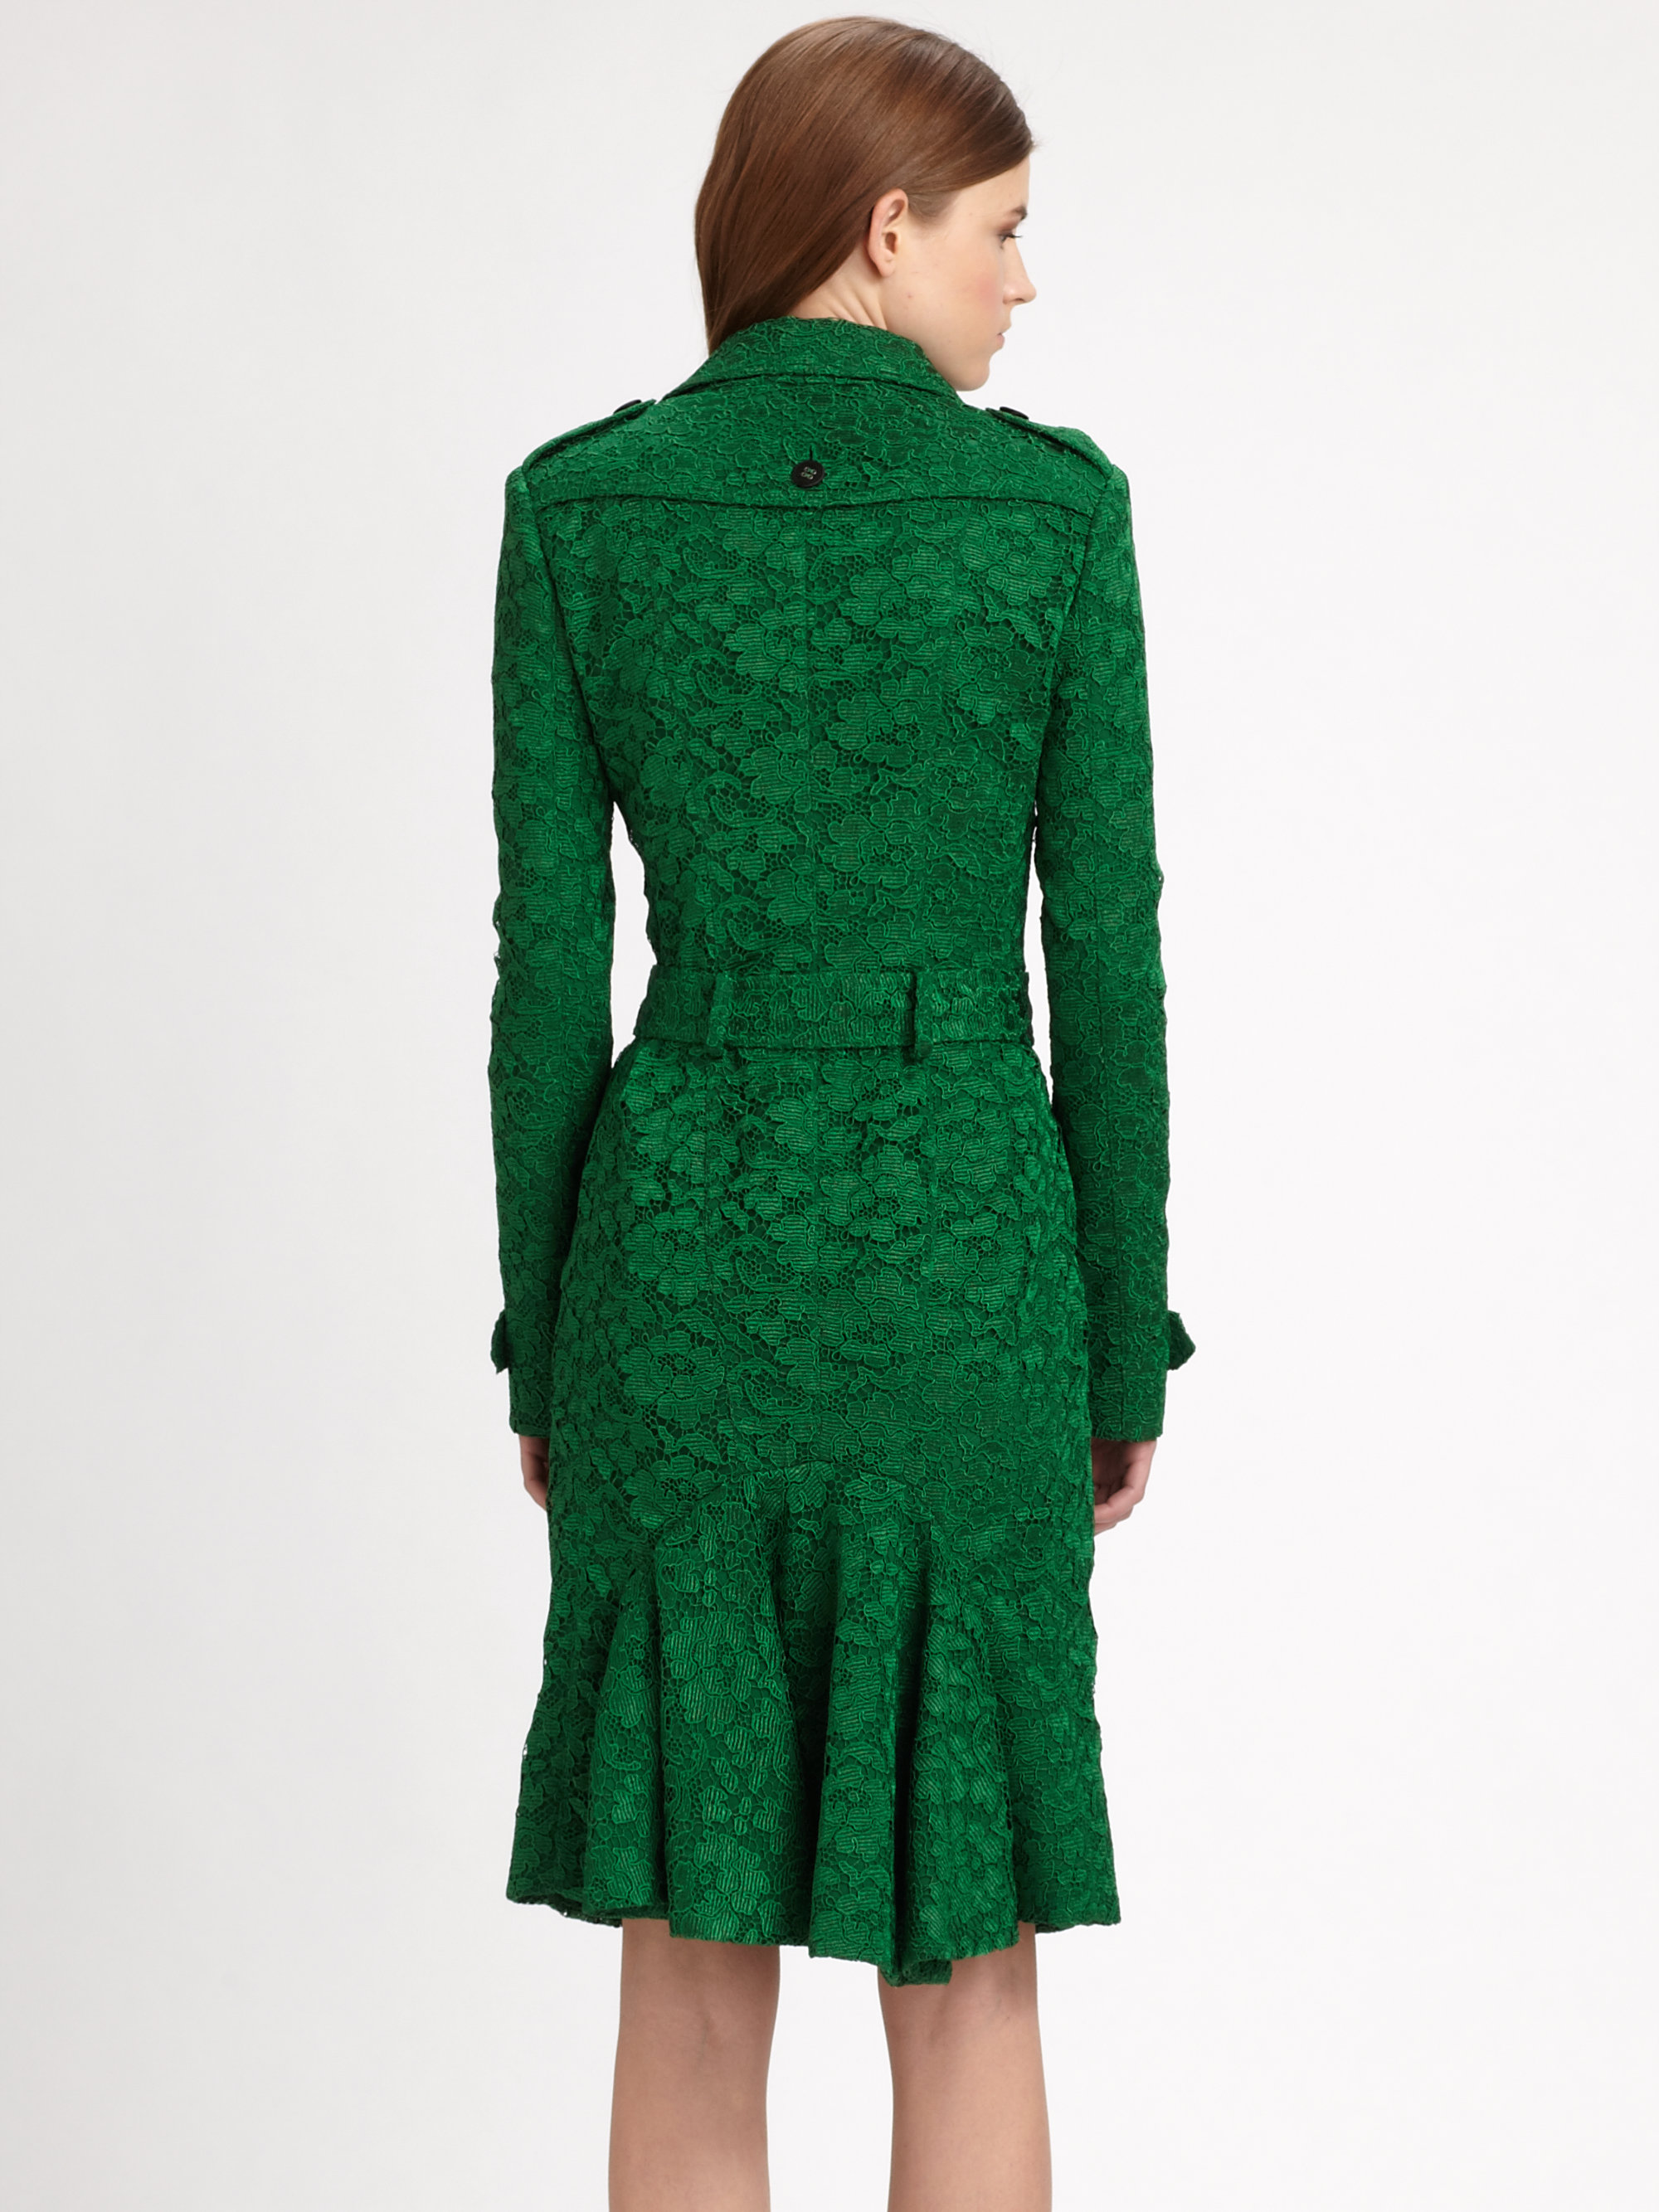 Burberry Prorsum Lace Trenchcoat in Green | Lyst